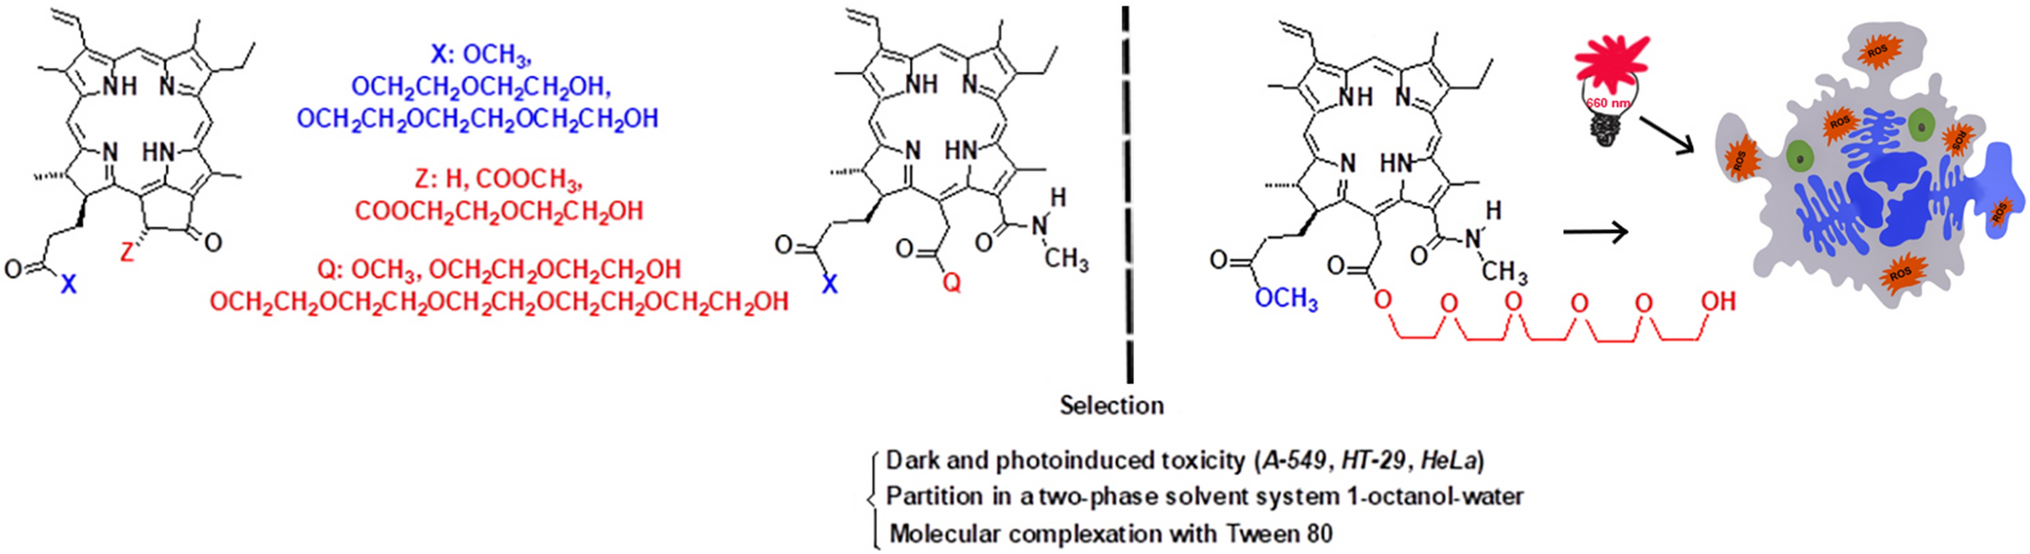 Photosensitizing effects and physicochemical properties of chlorophyll a derivatives with hydrophilic oligoethylene glycol fragments at the macrocycle periphery